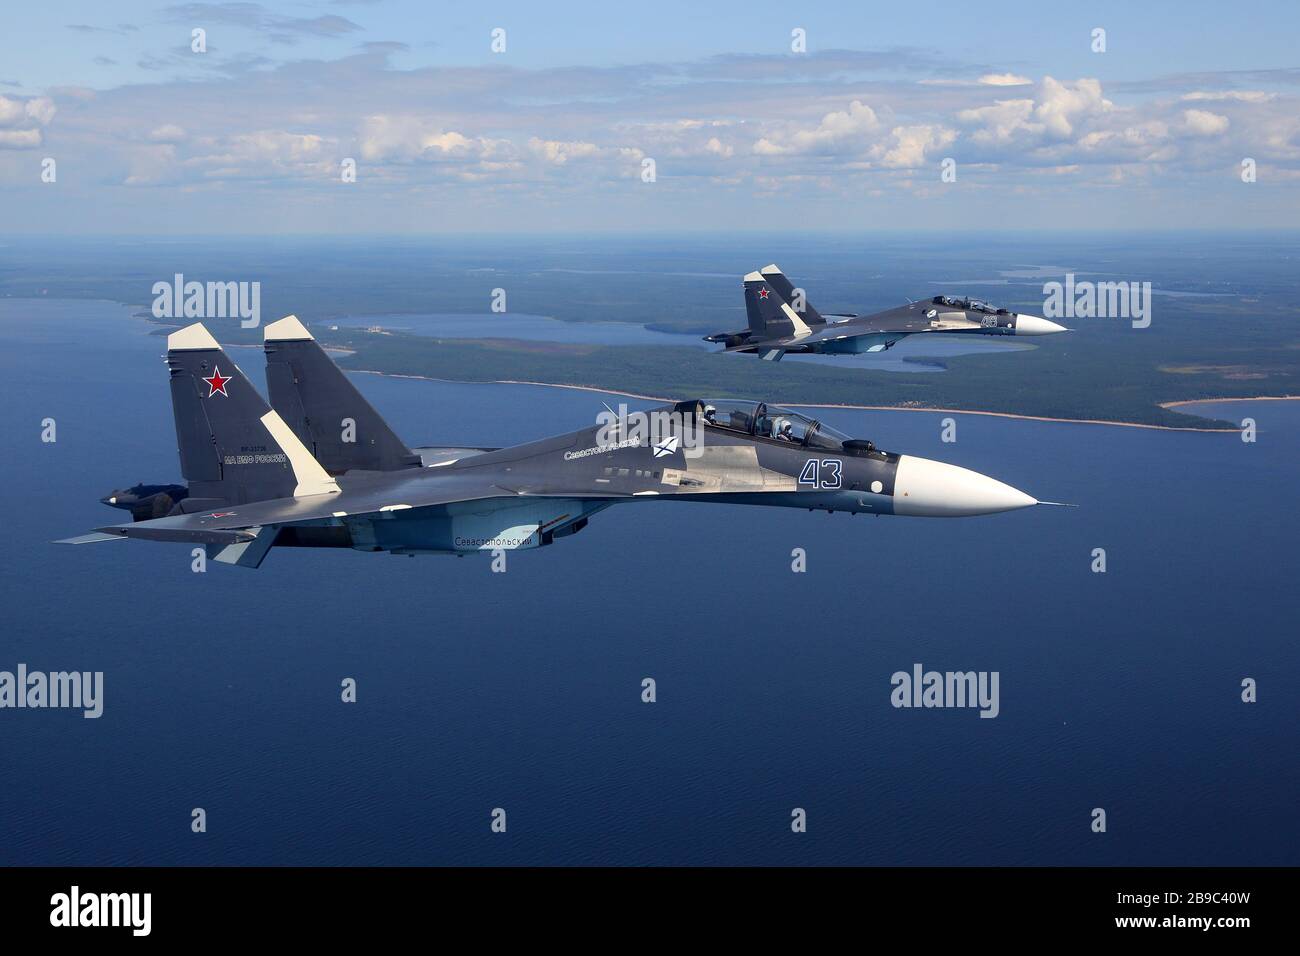 Su-30SM jet fighters of the Russian Navy flying over Gulf of Finland, Russia. Stock Photo